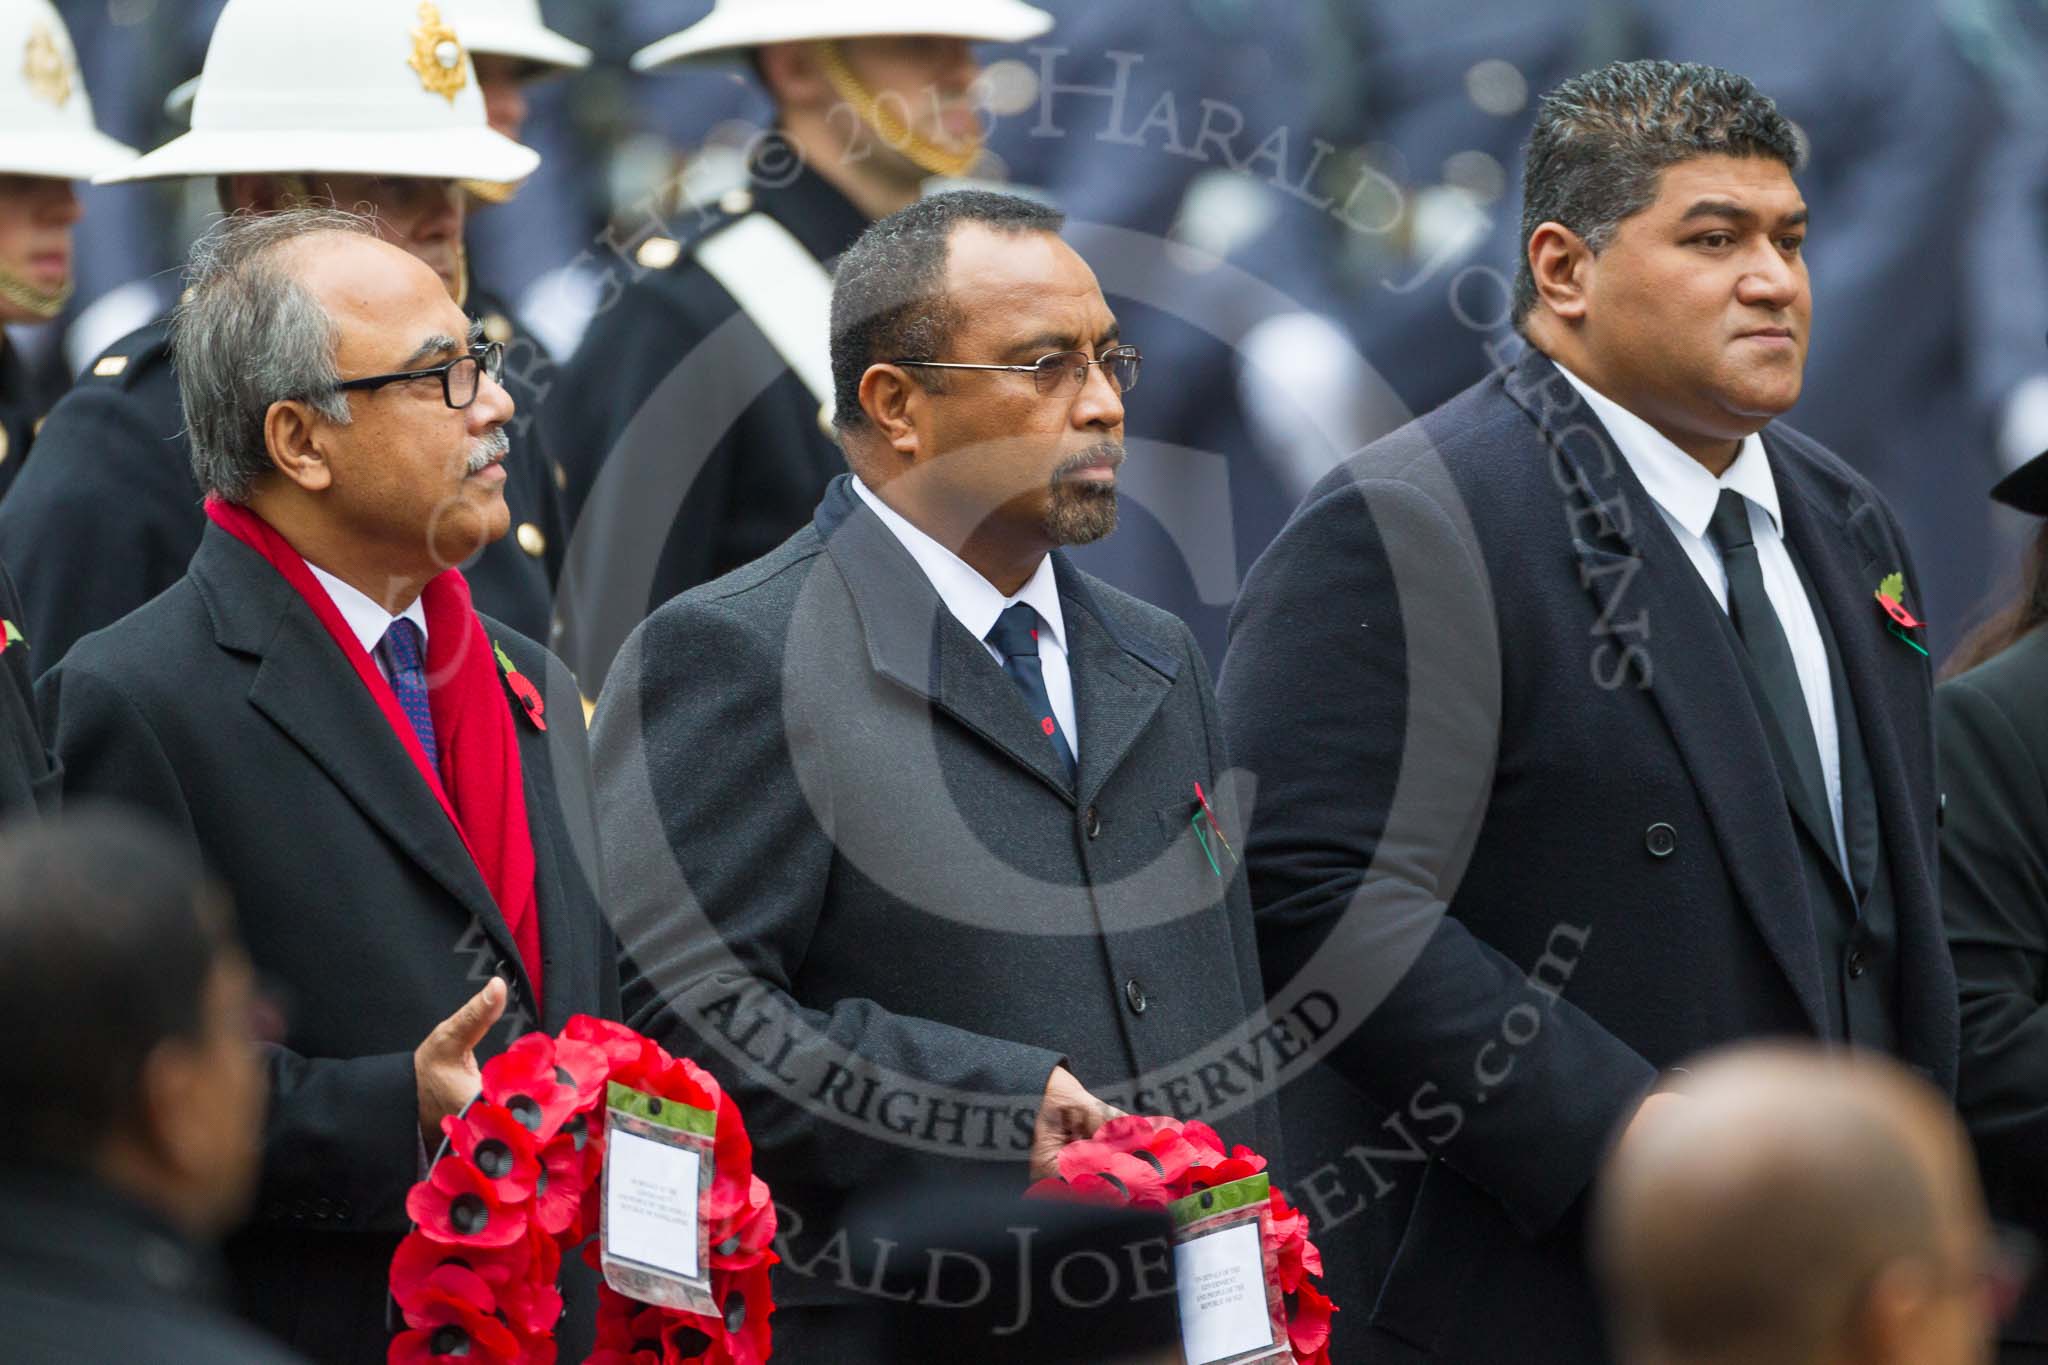 Remembrance Sunday at the Cenotaph 2015: The High Commissioner of Bangladesh, the High Commissioner of Fiji and the Acting High Commissioner of Tonga the  with their wreaths at the Cenotaph. Image #116, 08 November 2015 10:57 Whitehall, London, UK